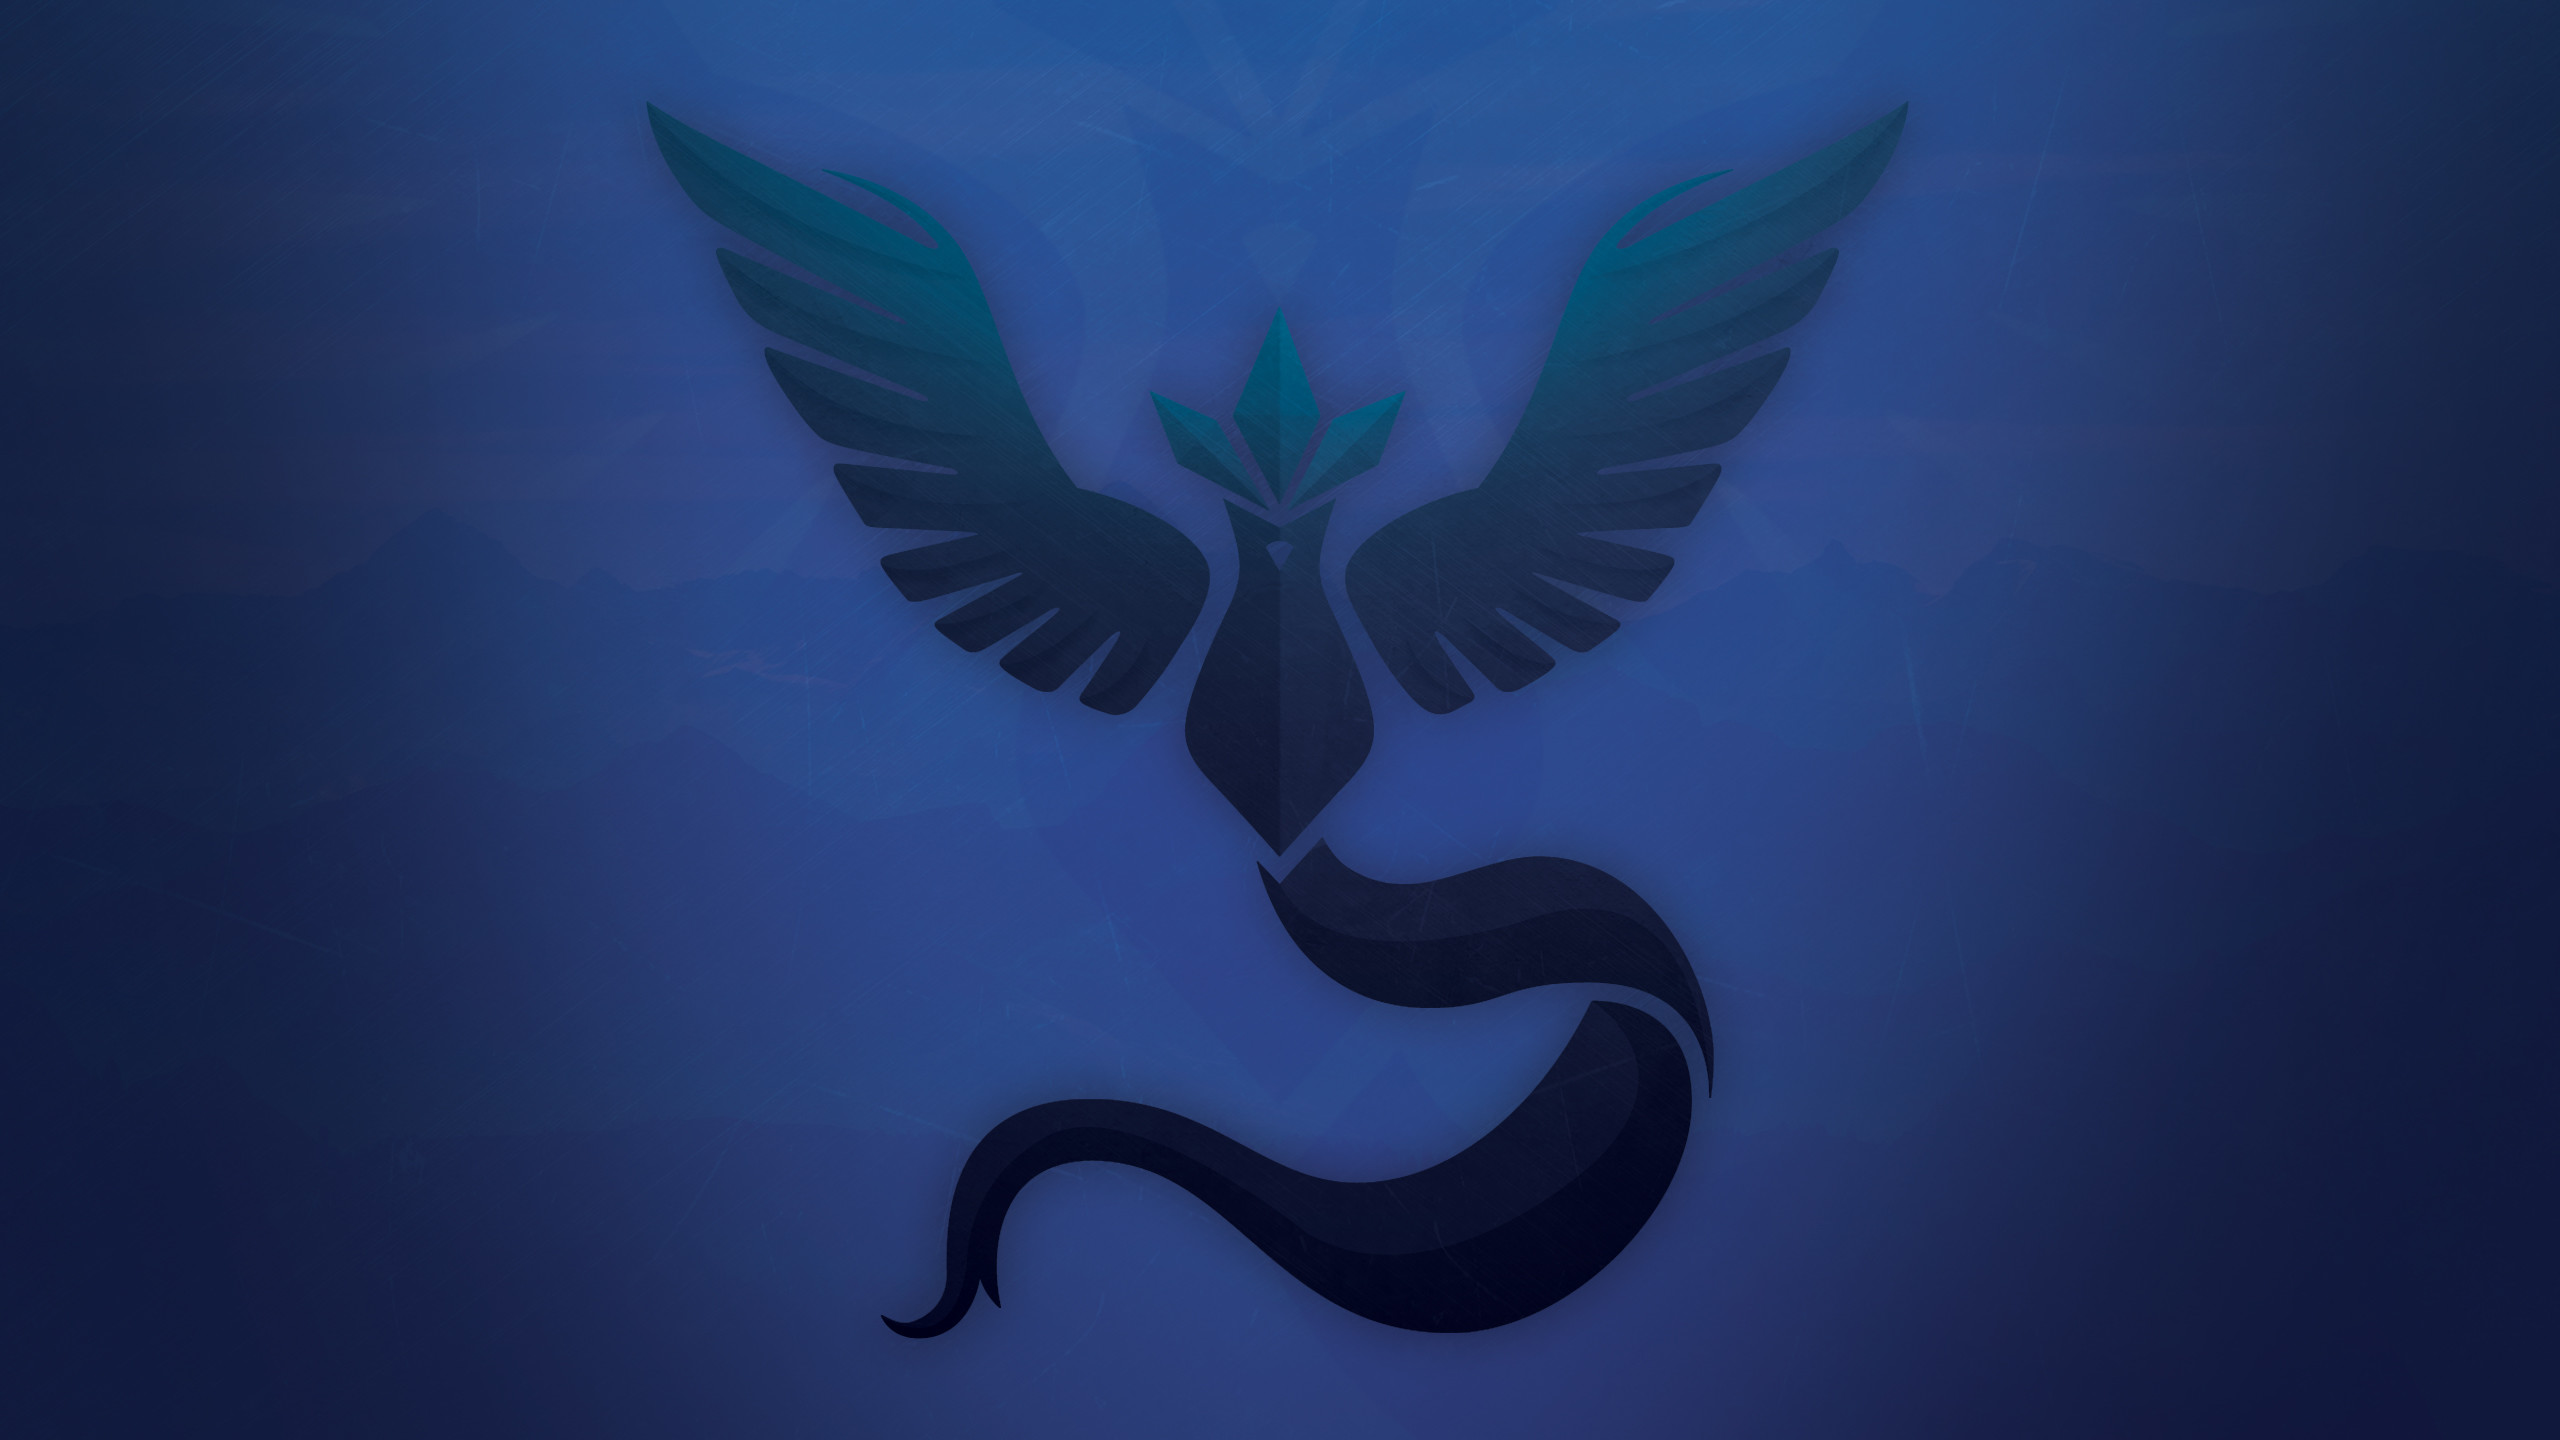 2560x1440 FANARTMade a Team Mystic wallpaper! I'm new to this whole reddit thing, but  I hope you guys like it!